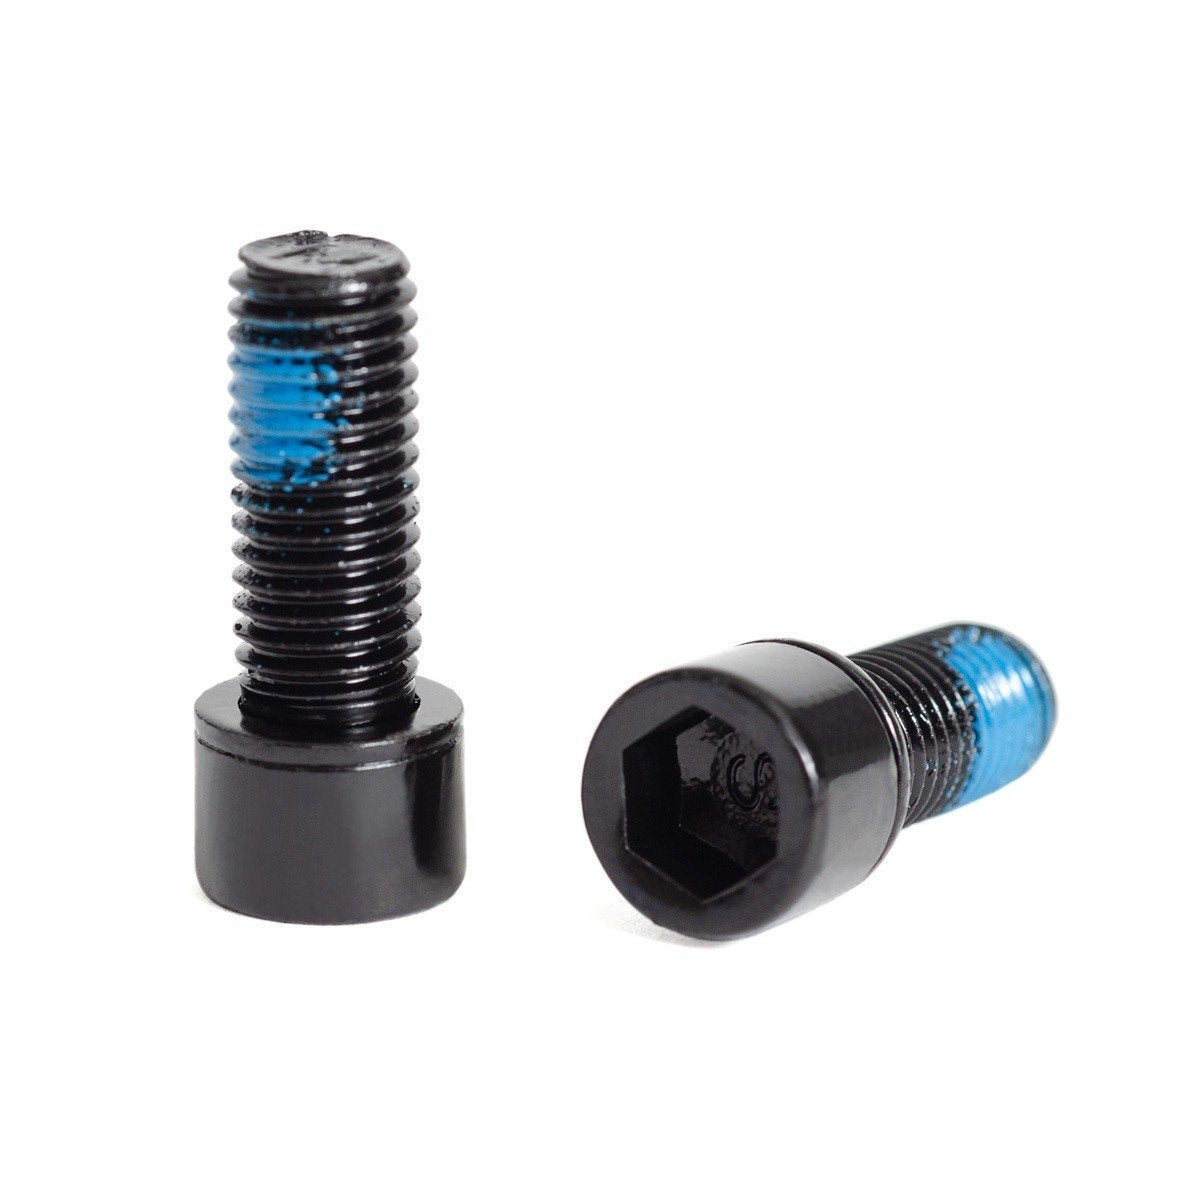 RANT Bangin' 8 Pinch Bolts M7x1mm (pair) - Sparkys Brands Sparkys Brands  Components, Nuts and Bolts, Rant Bmx bmx pro quality freestyle bicycle